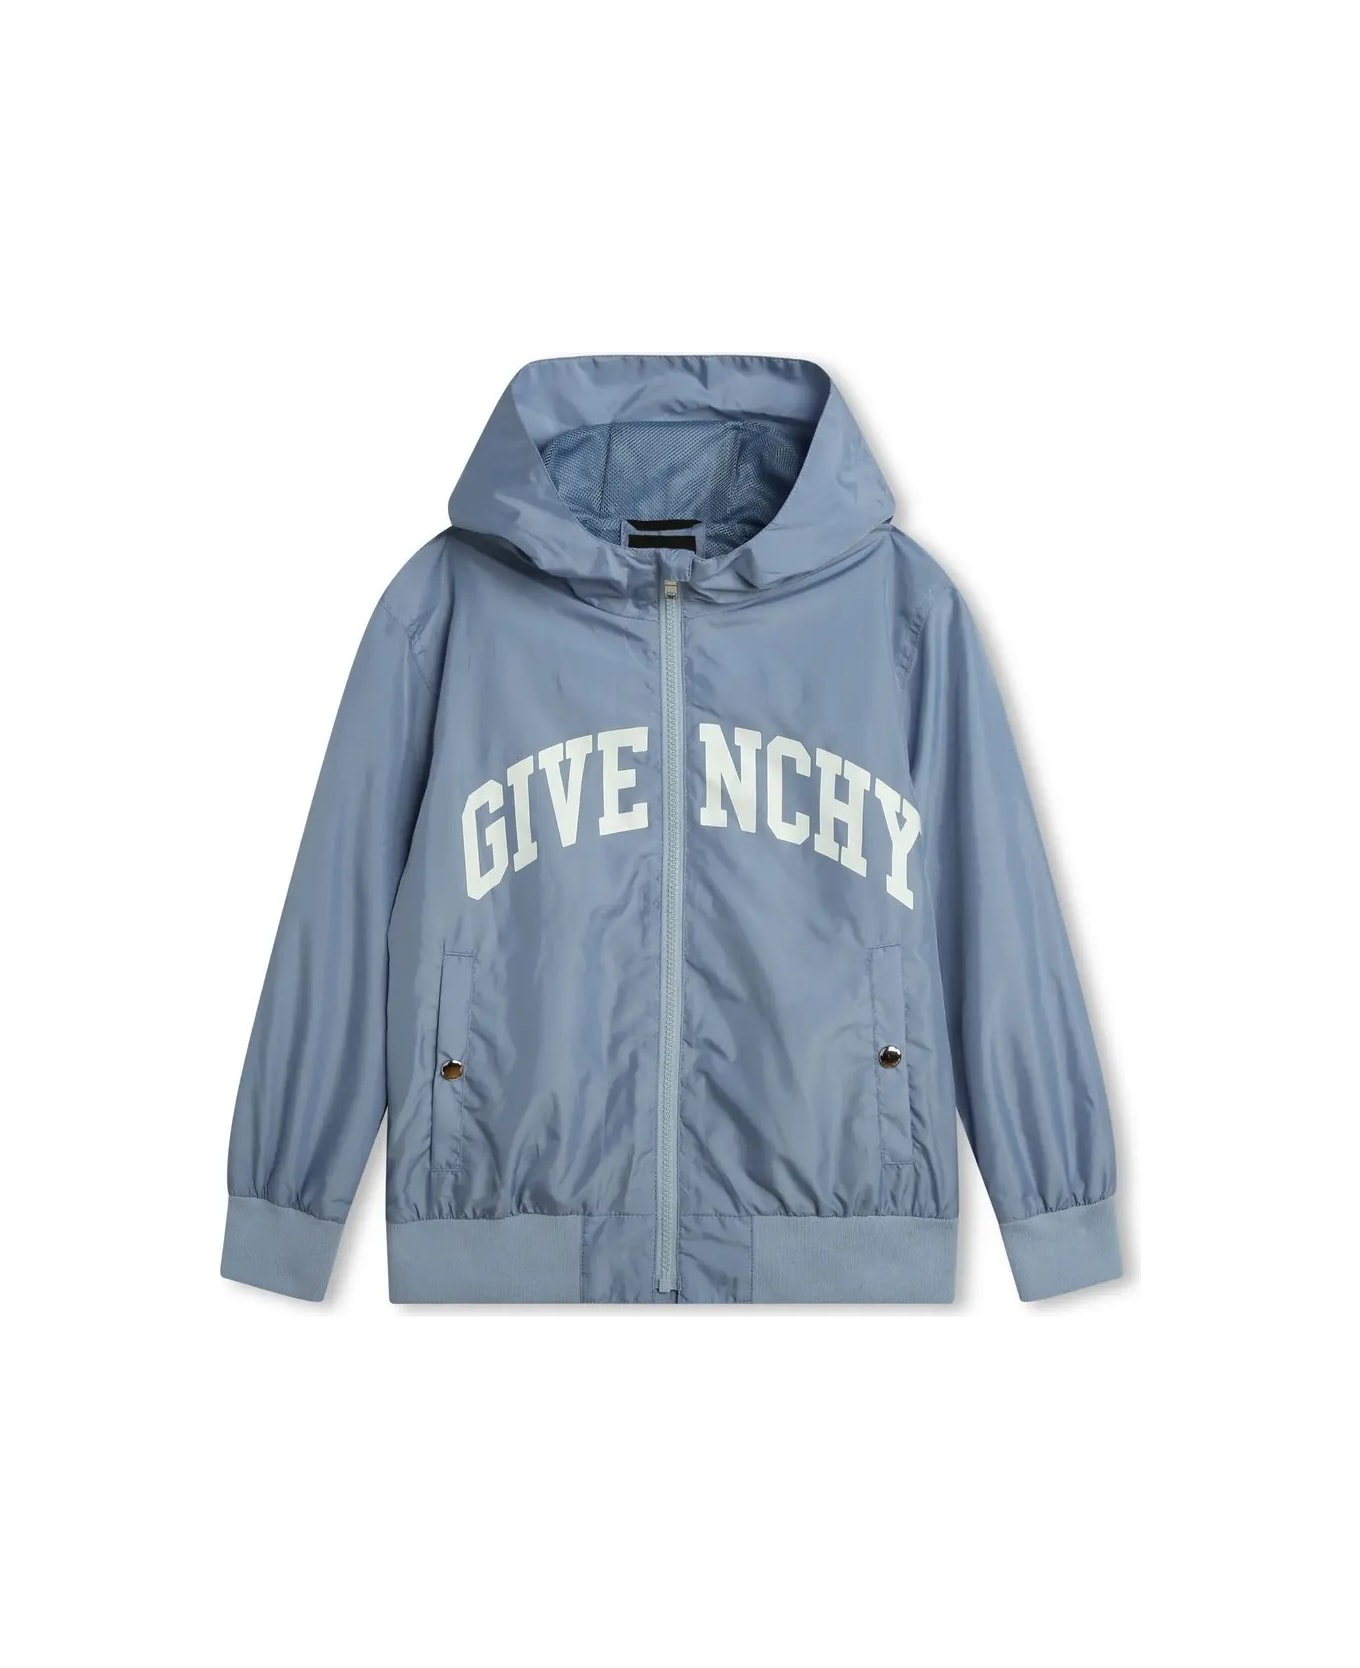 Givenchy Light Blue Givenchy Pezzi With Zip And Hood - Azzurro